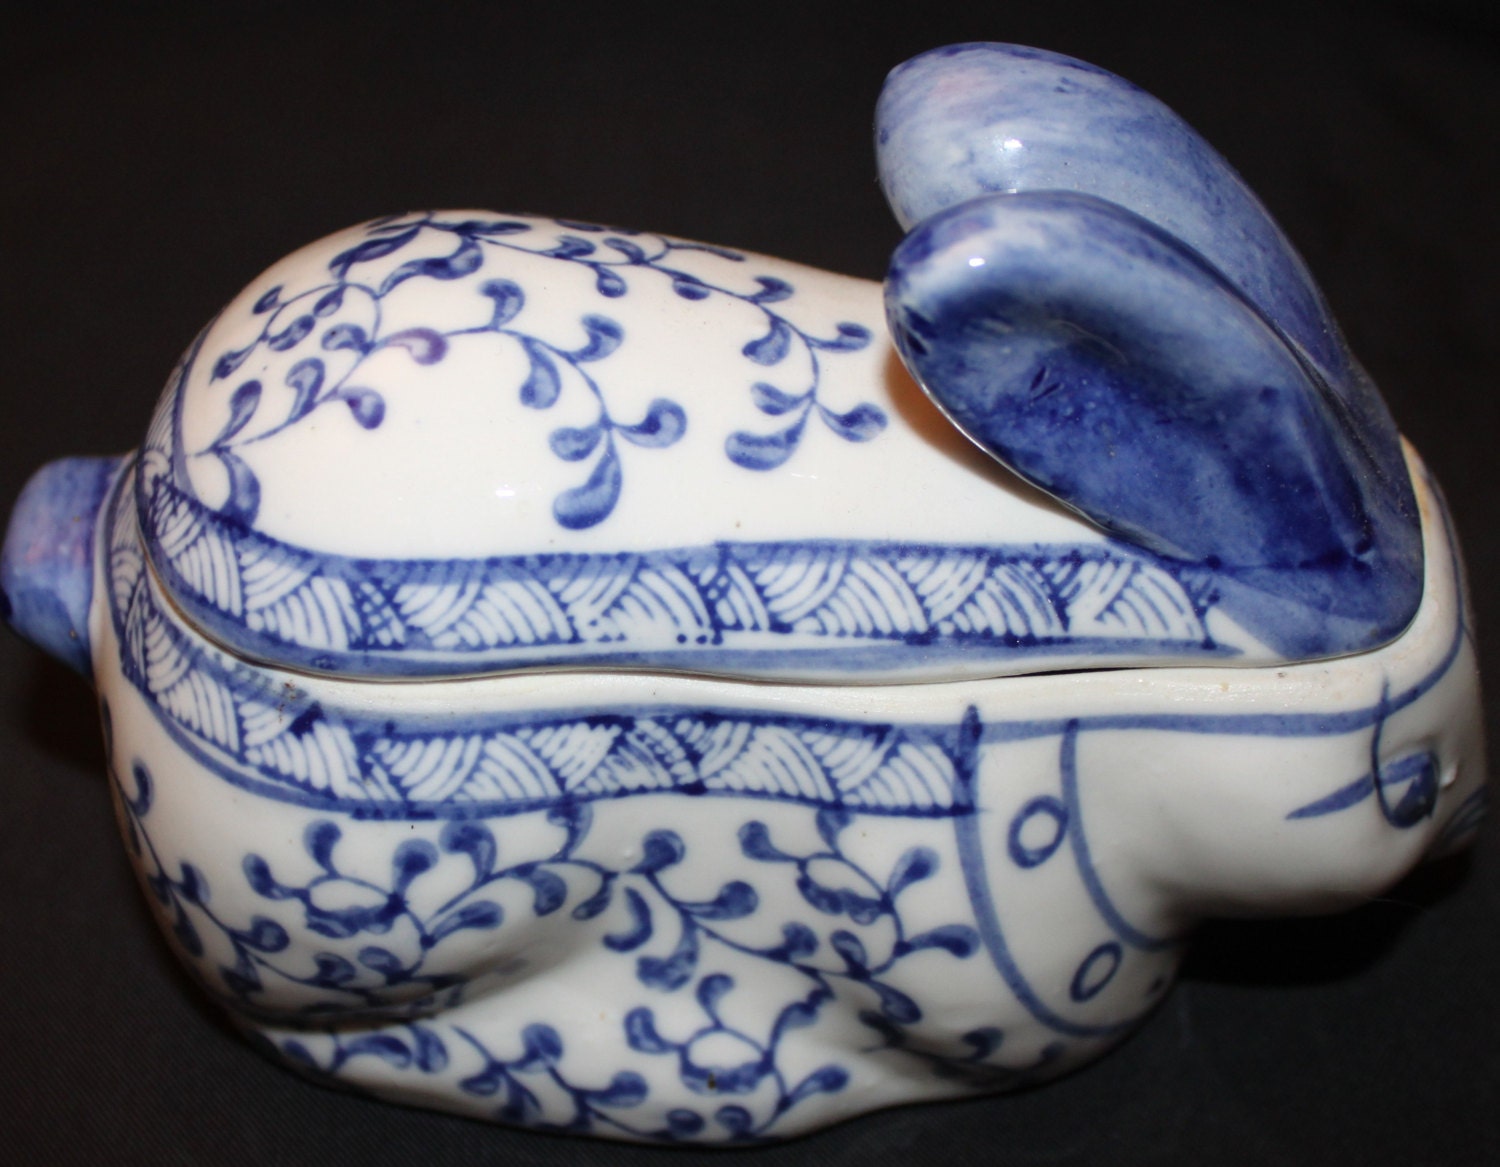 Vintage Blue and White Porcelain Rabbit Figurine with Lid